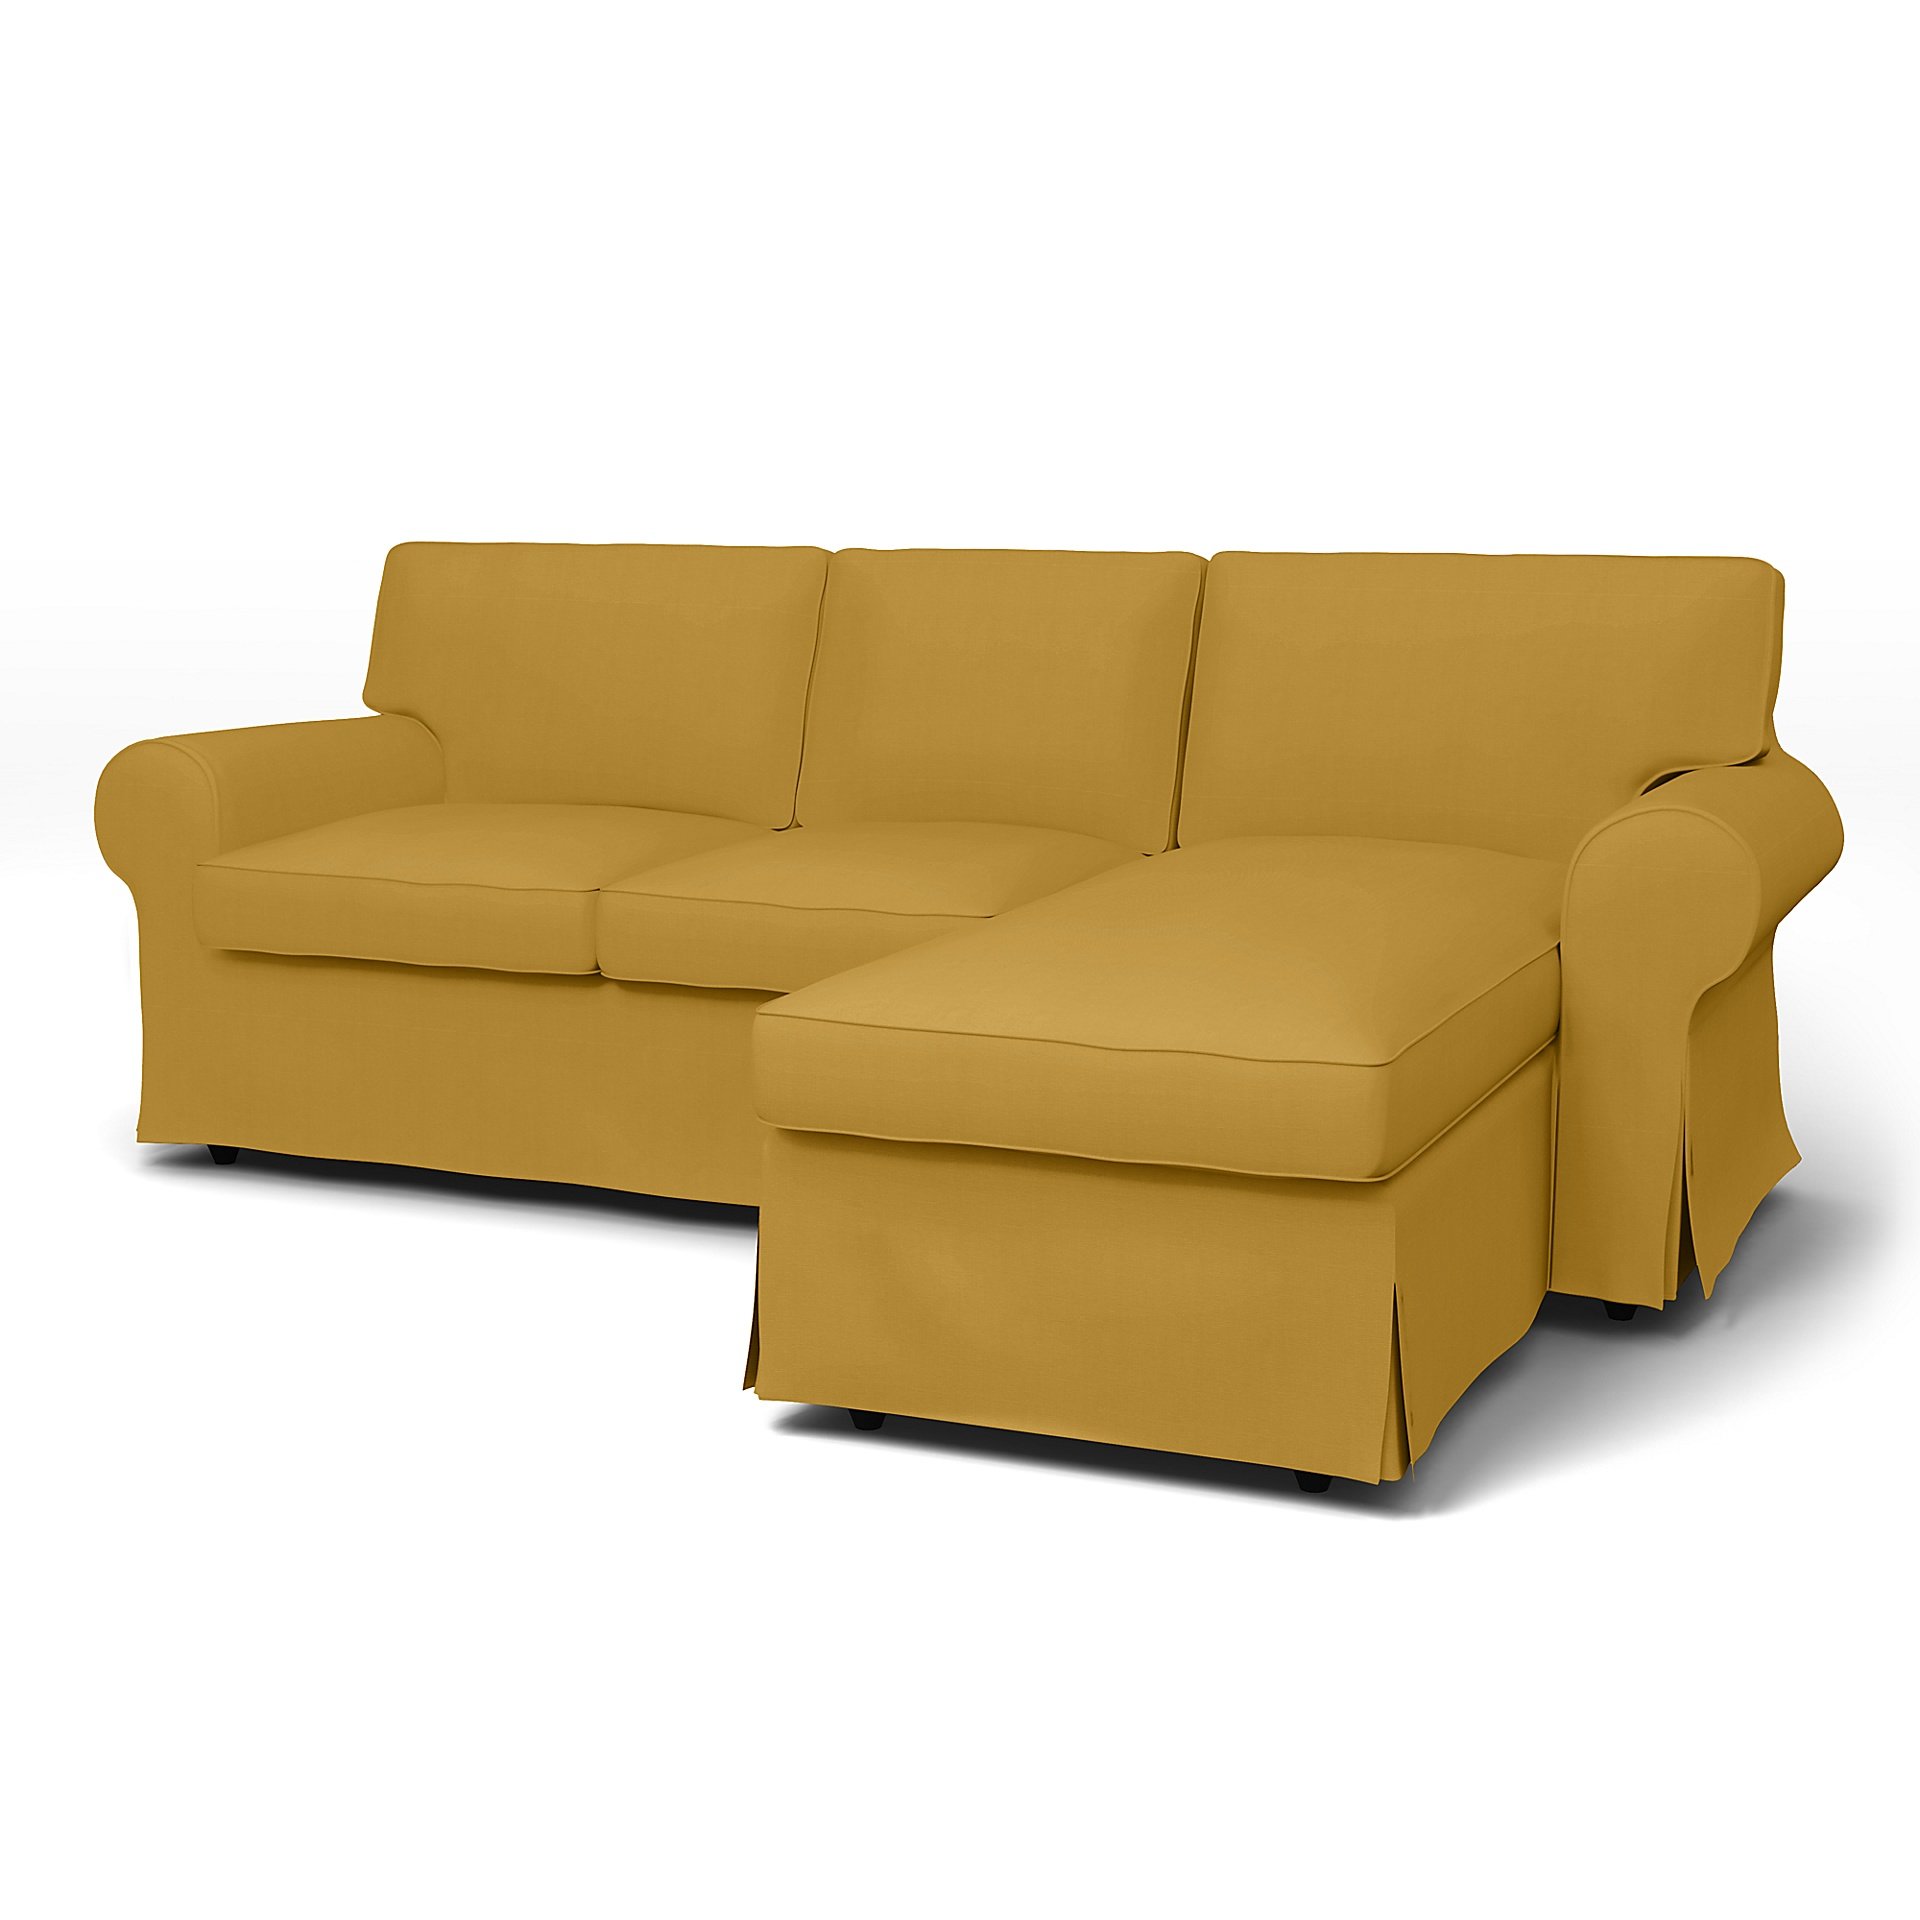 IKEA - Ektorp 3 Seater Sofa with Chaise Cover, Honey Mustard, Cotton - Bemz